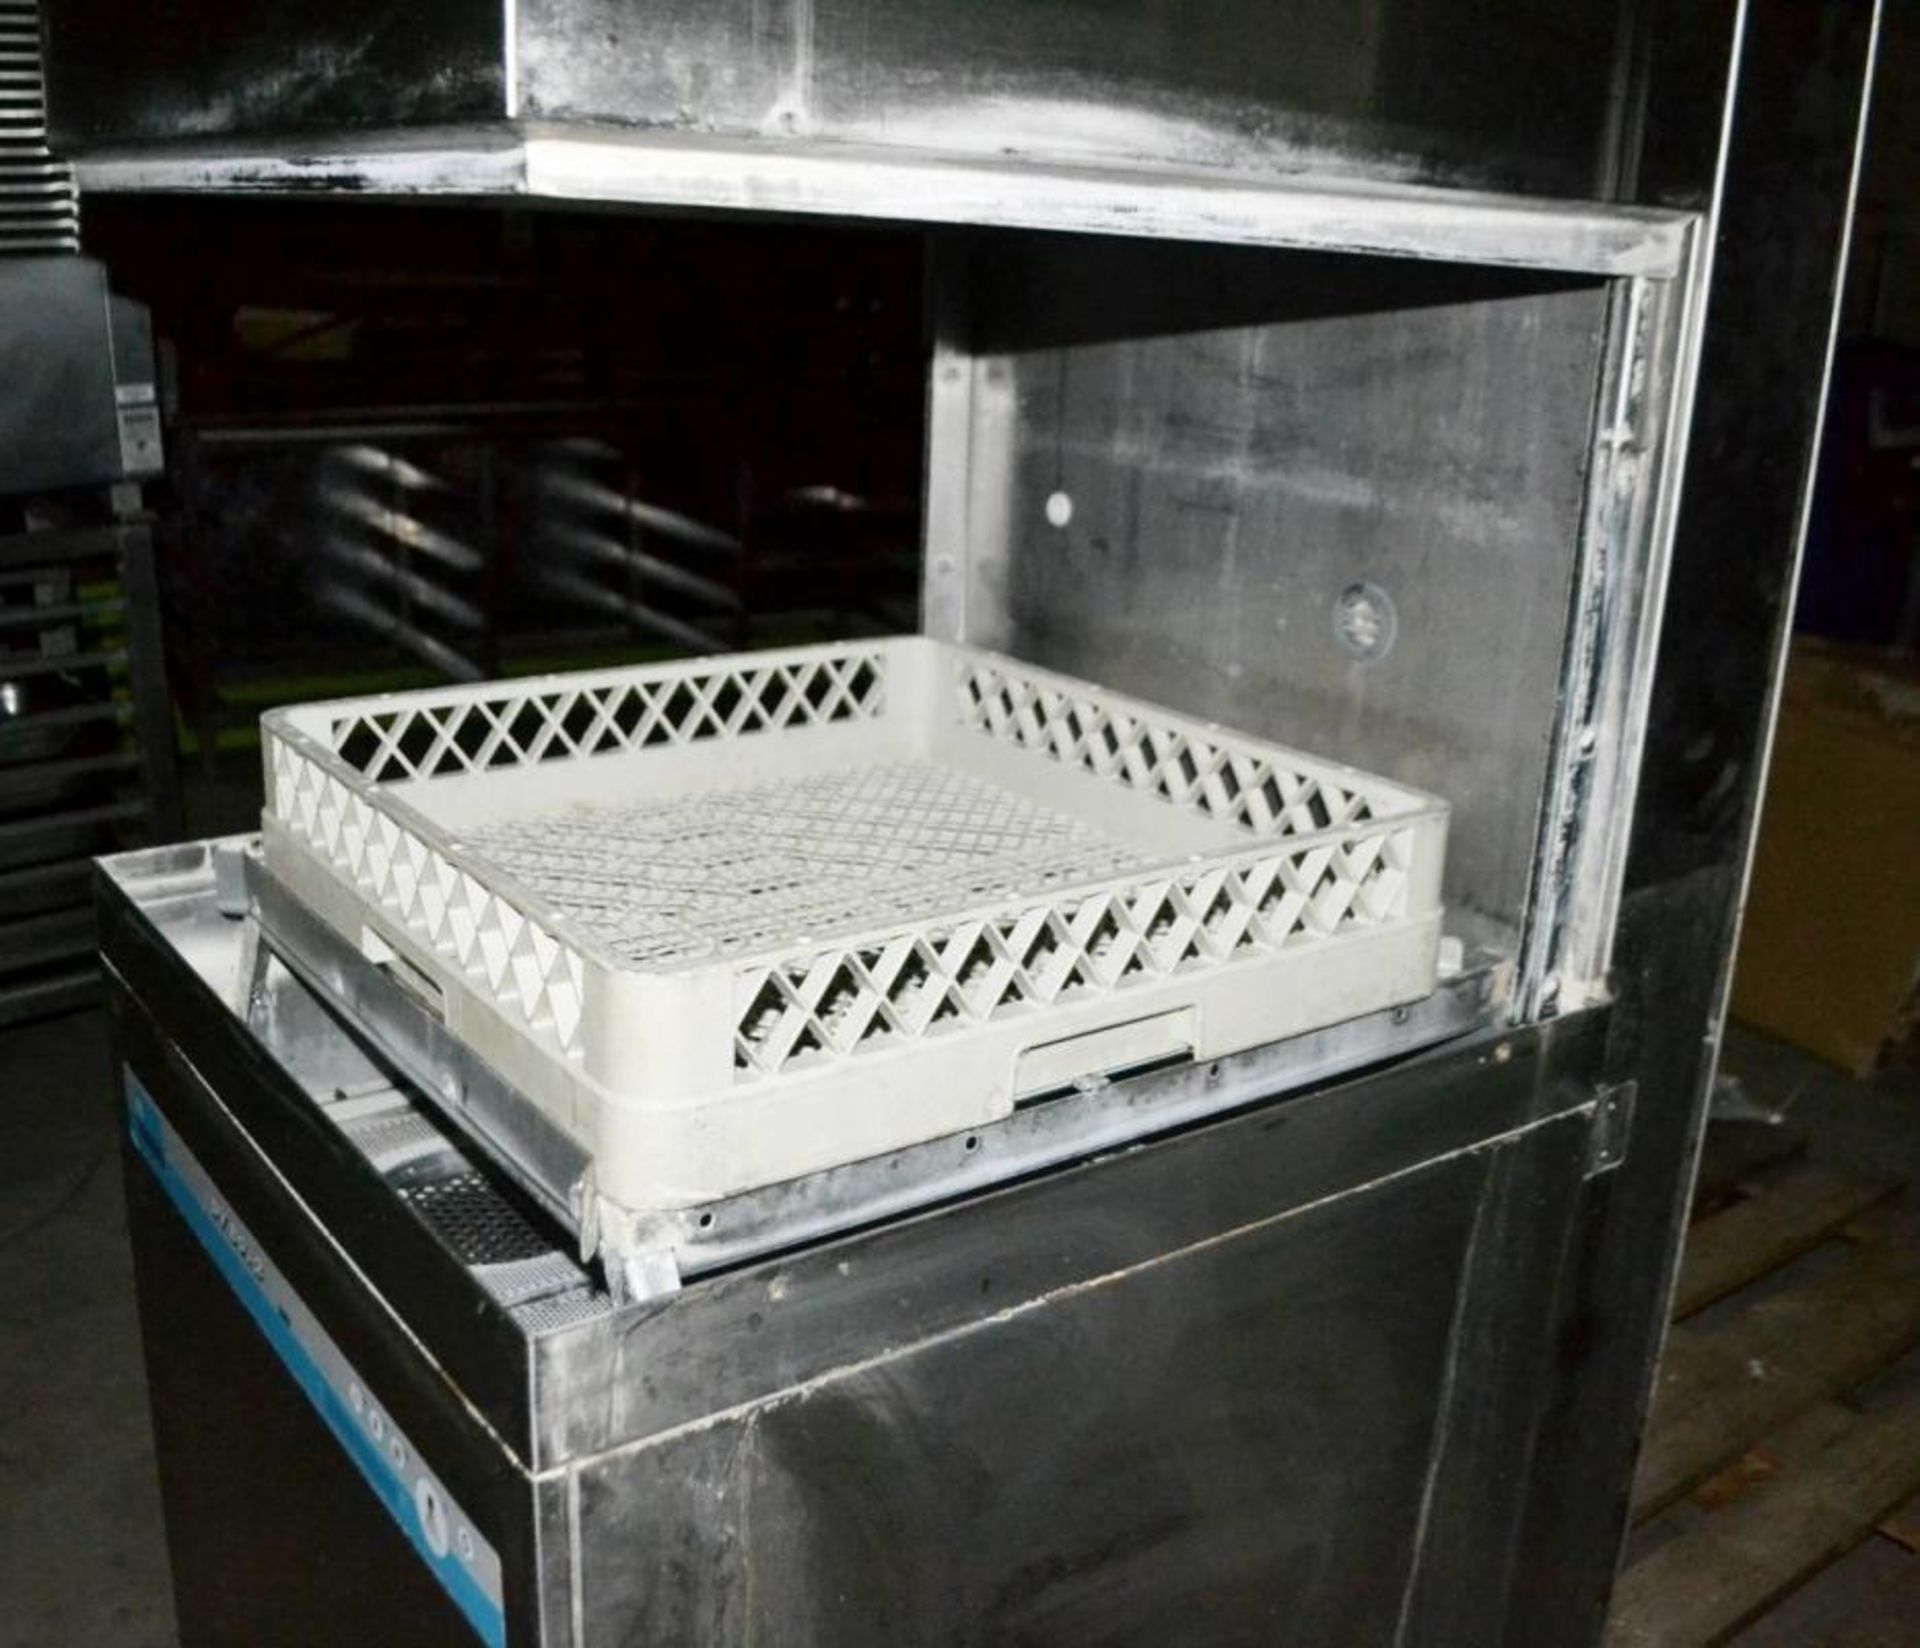 1 x MEIKO DV80.2 Pass Through Dishwasher With 2 x Modules And Inlet Sink - CL011 - Dimensions: 63 x - Image 6 of 10